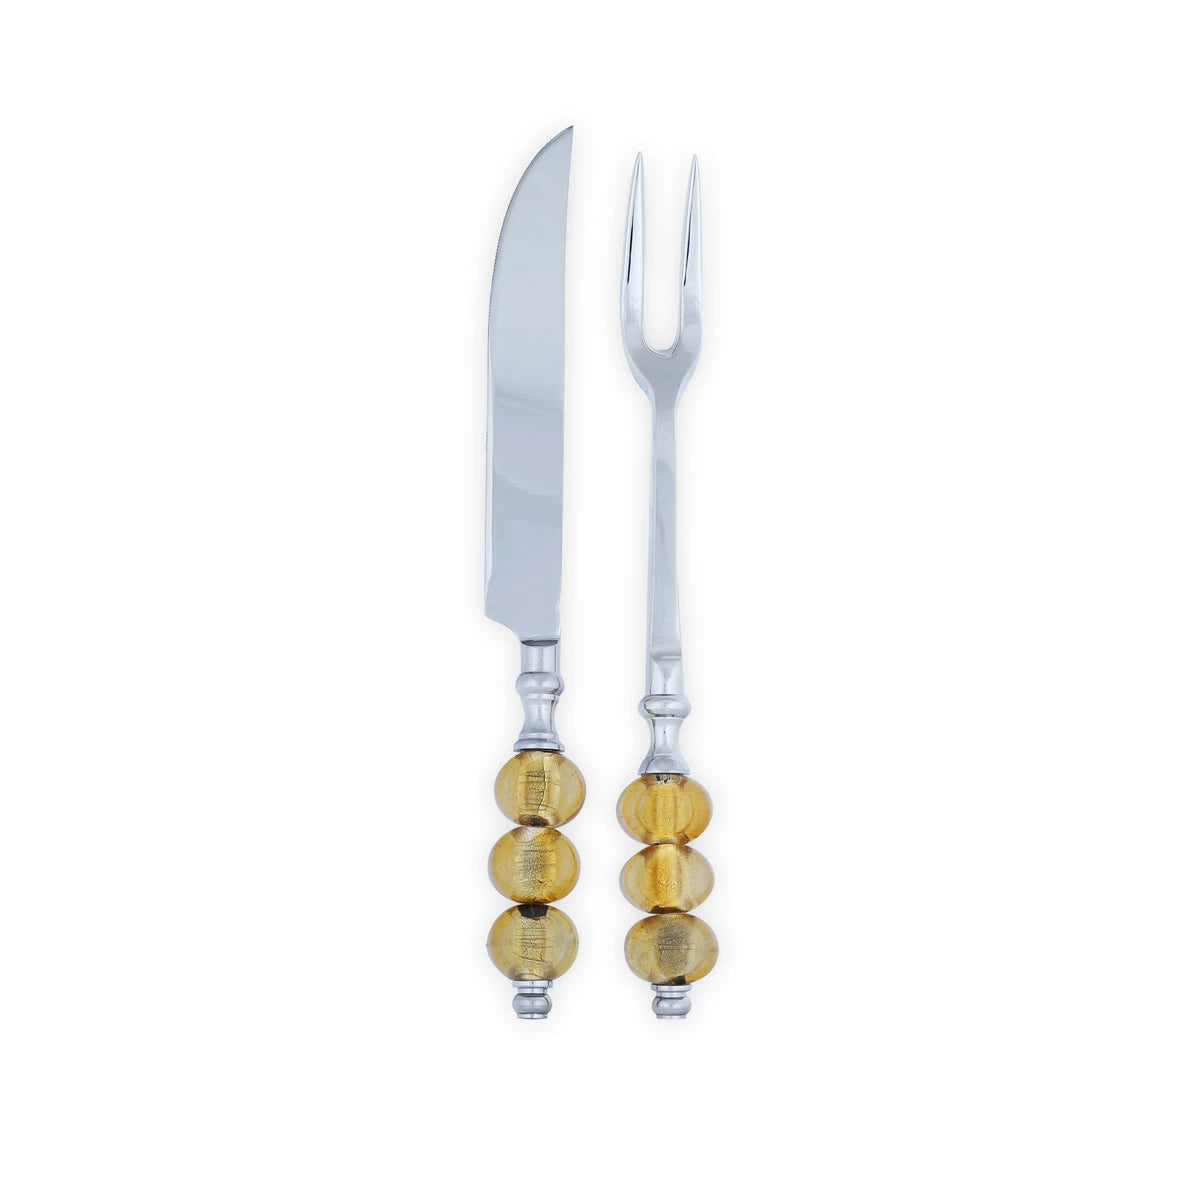 Decorative Carving Knife Set with Acrylic Beaded Handleses